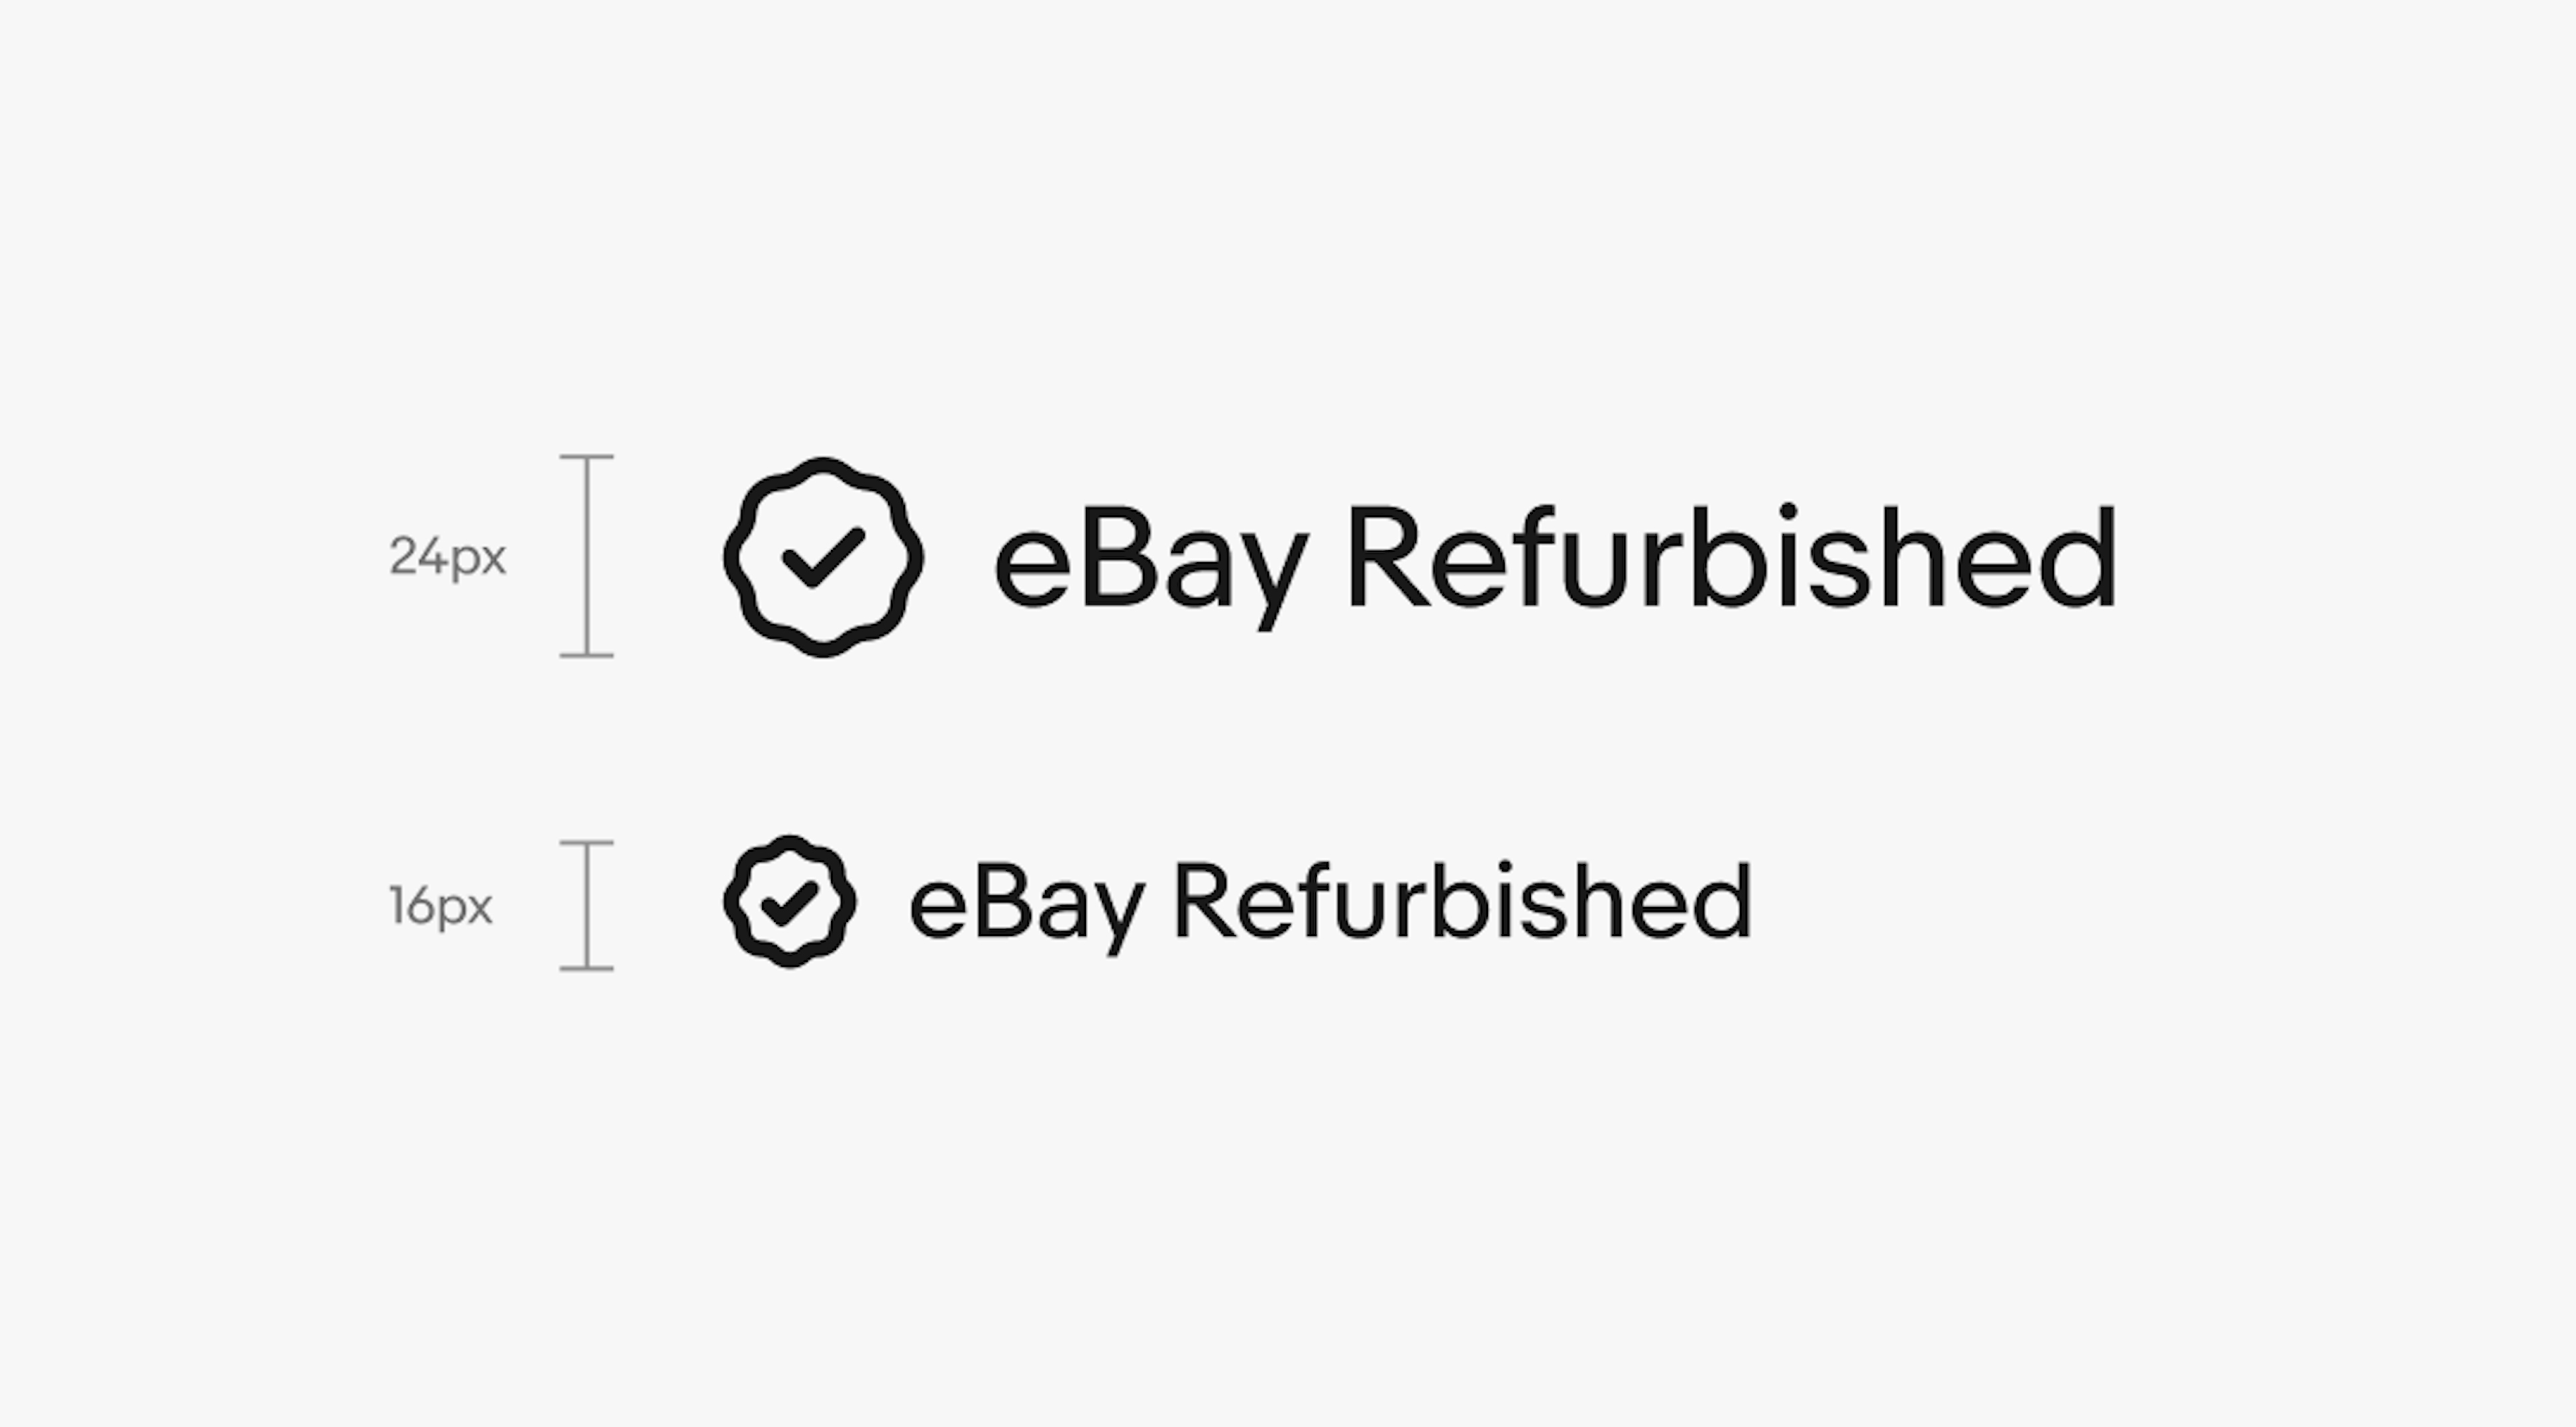 Two program badge lockups. Both have a rosette checkmark icon and “eBay Refurbished” text. The top one is a 24px lockup, and the bottom is a 16px lockup.